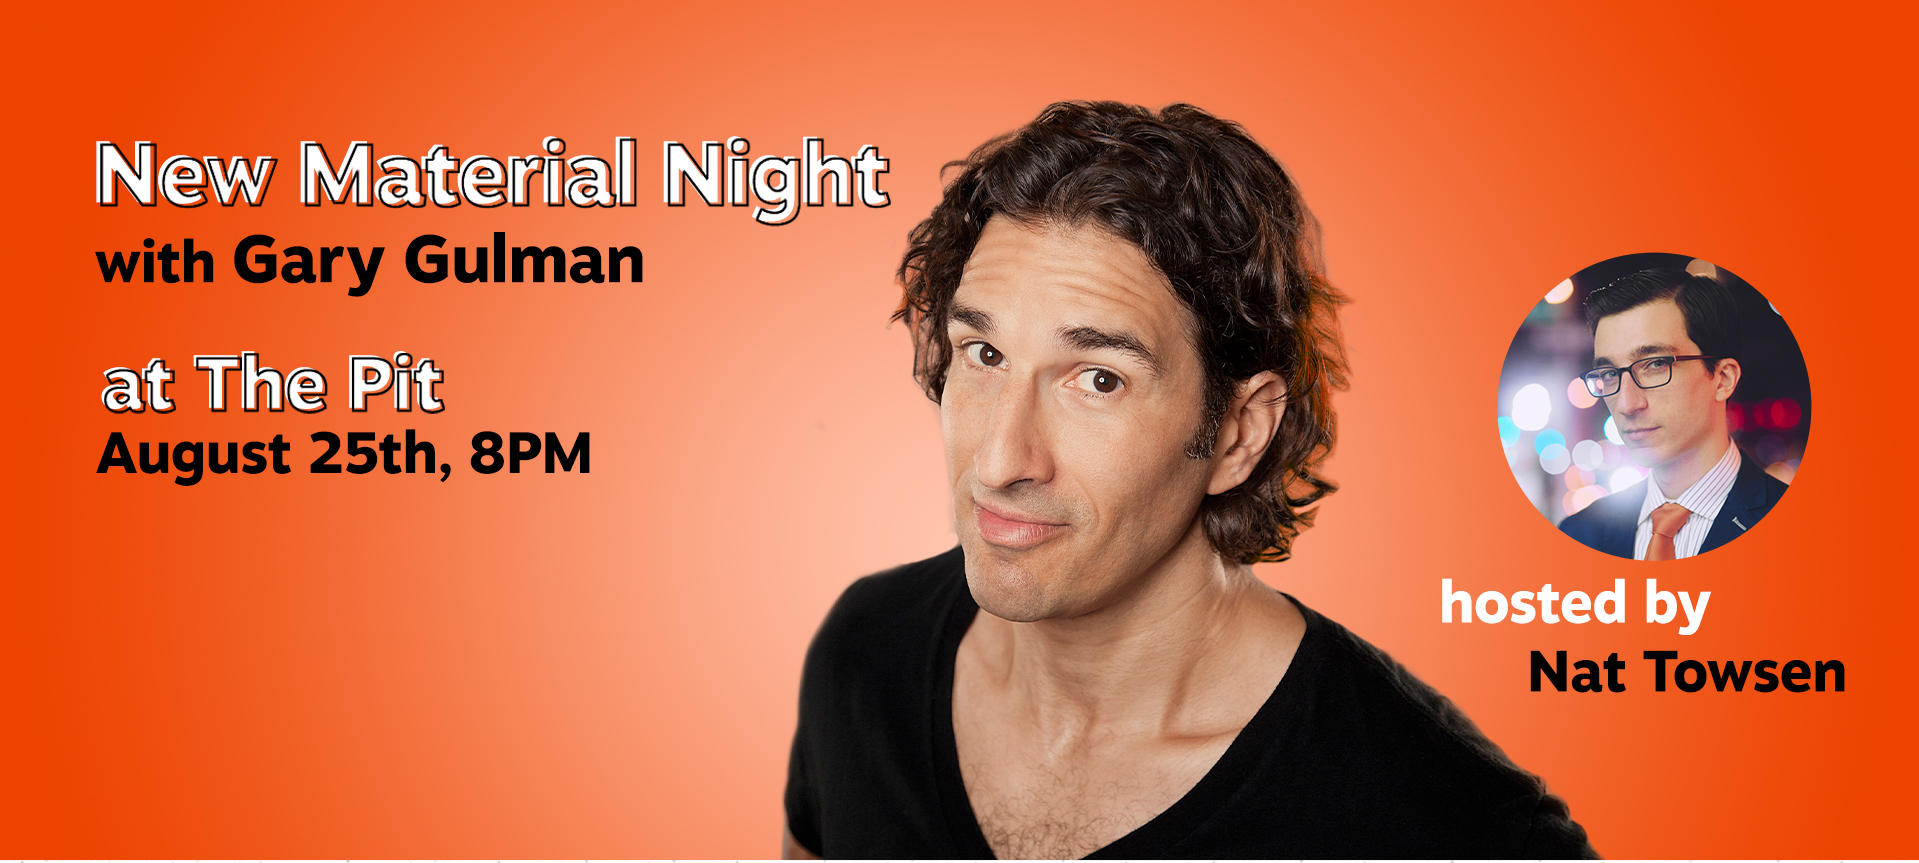 New Material Night with Gary Gulman & Nat Towsen